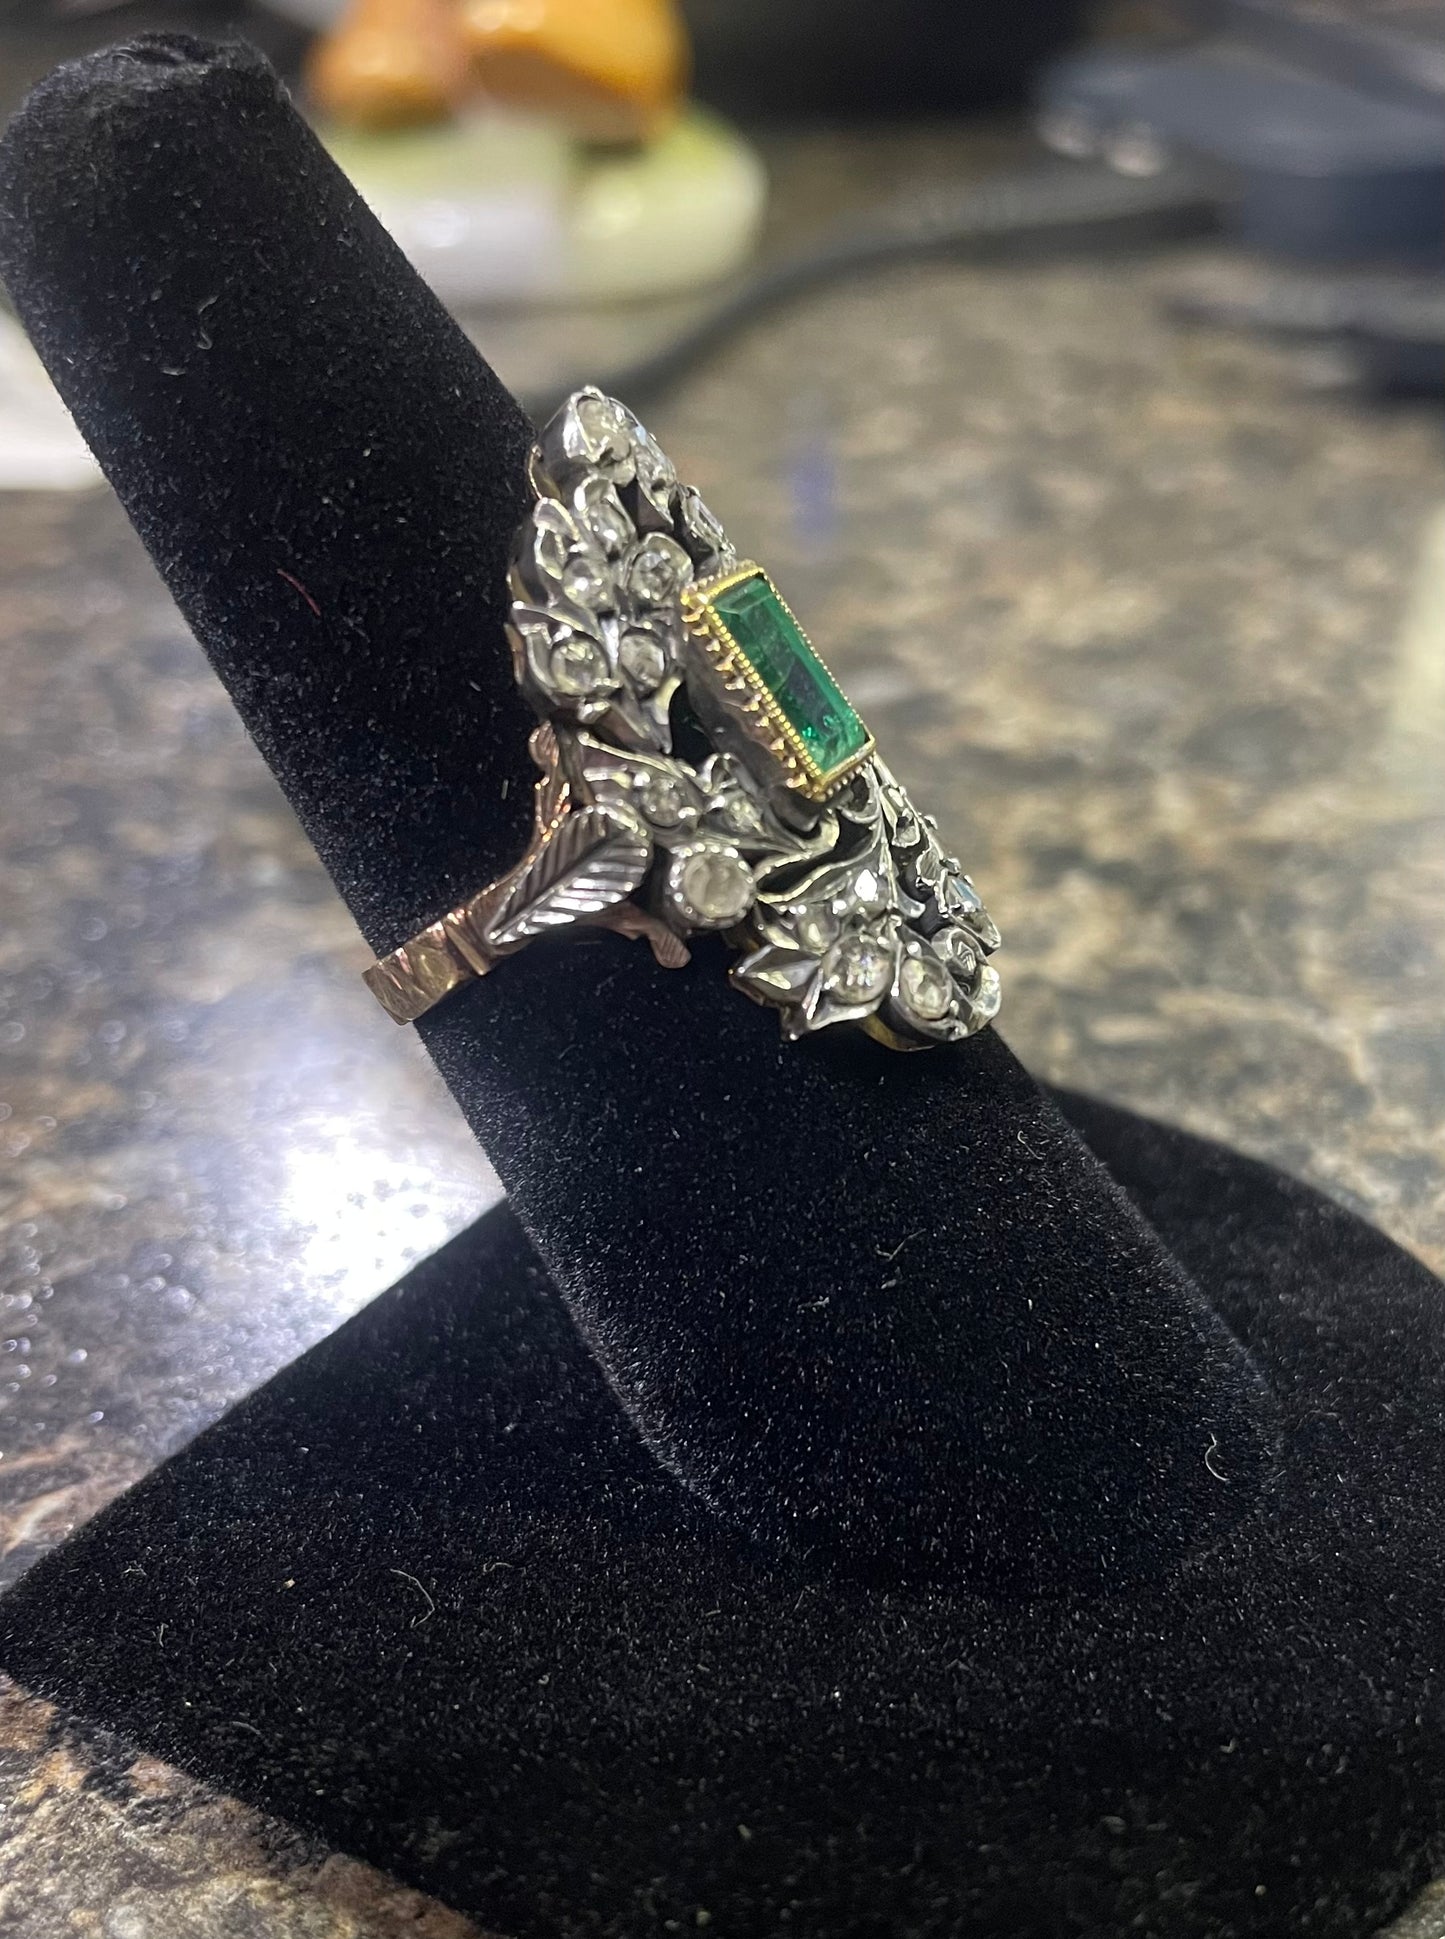 Gold, Emerald & Diamond Ancient Ring Size 6.5